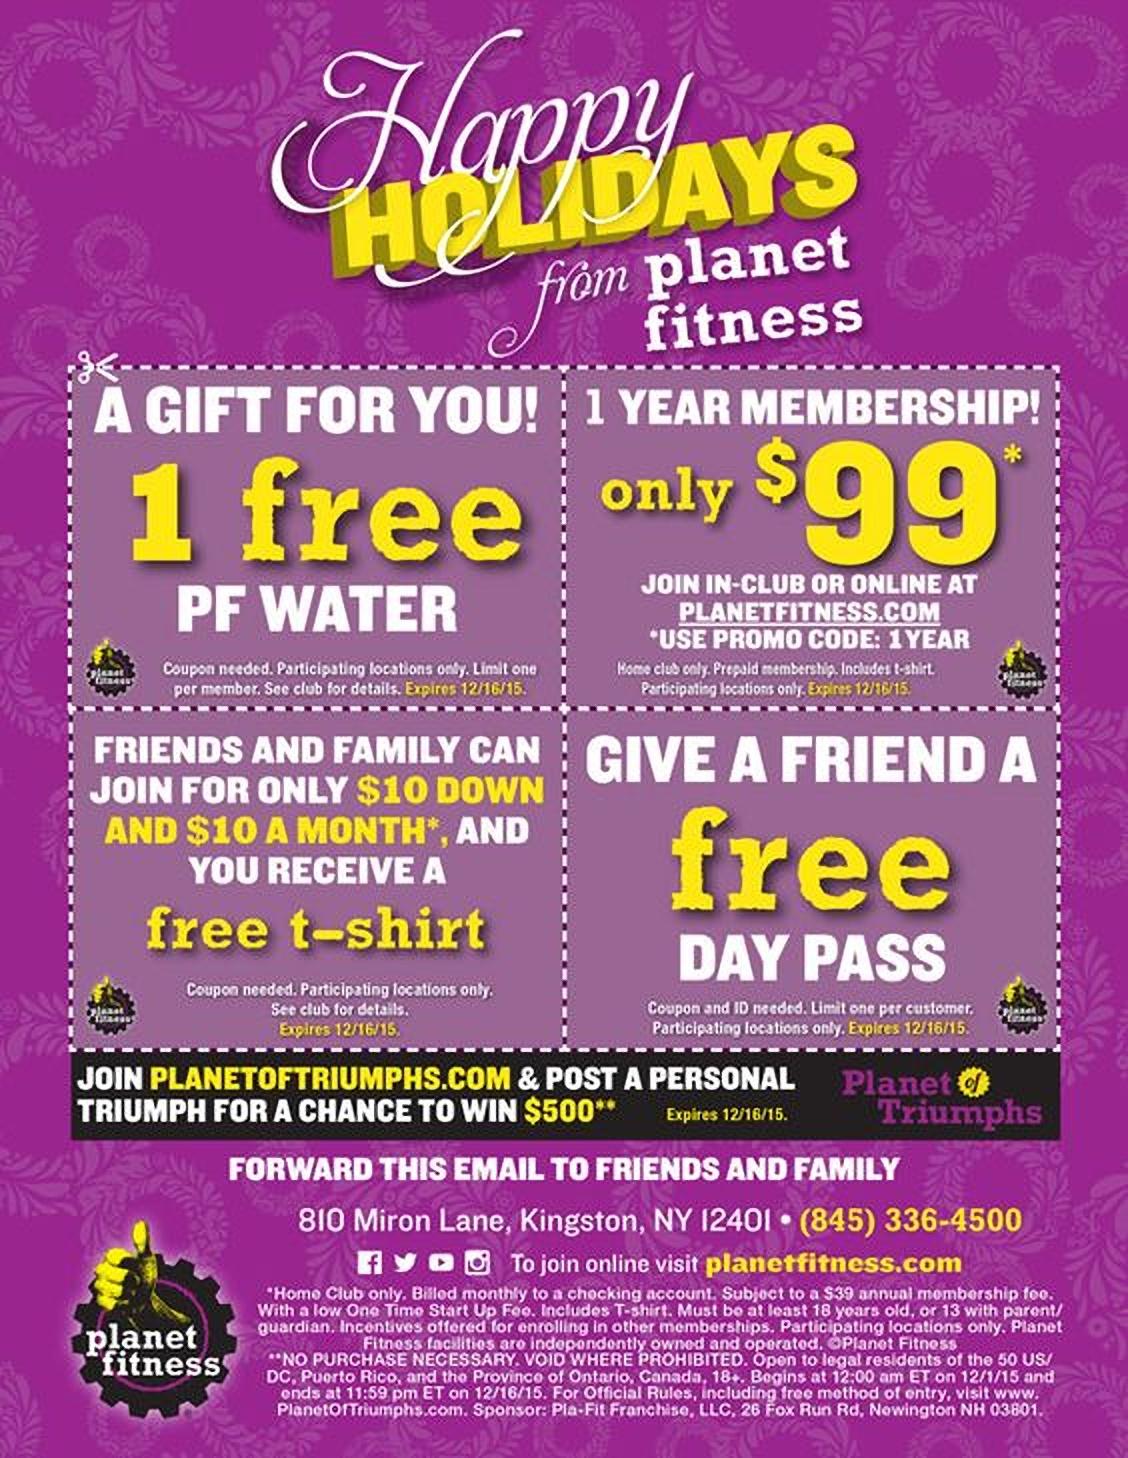 example from Planet Fitness, they offer a variety of different member exclusives for the holiday season.